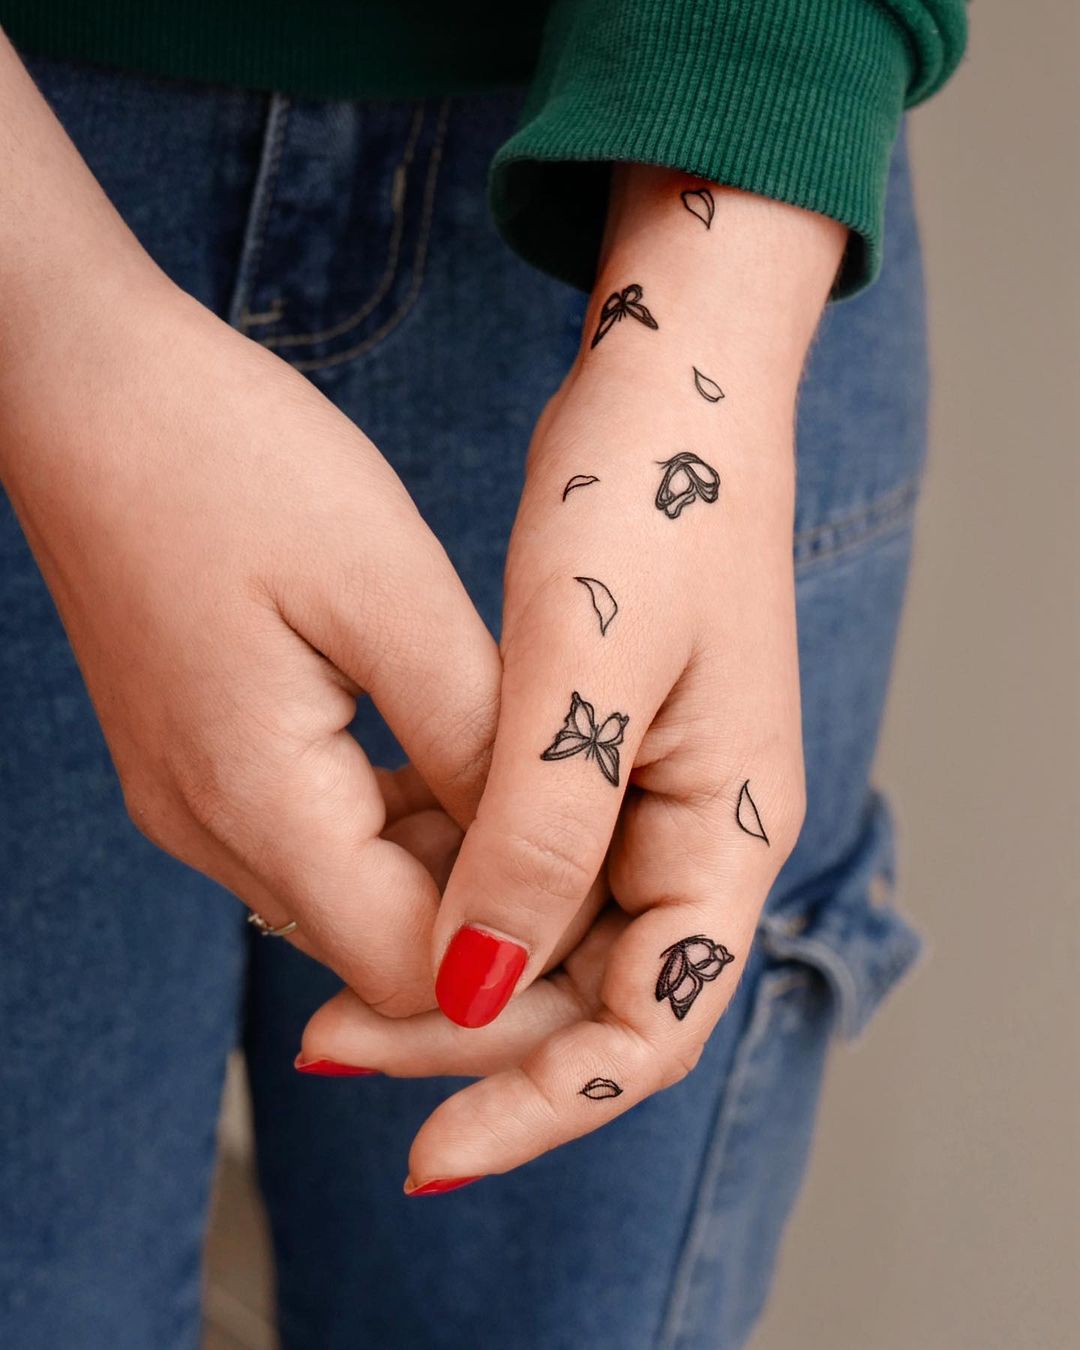 54 Great Finger Tattoo Ideas You Will Instantly Love - Hairstylery